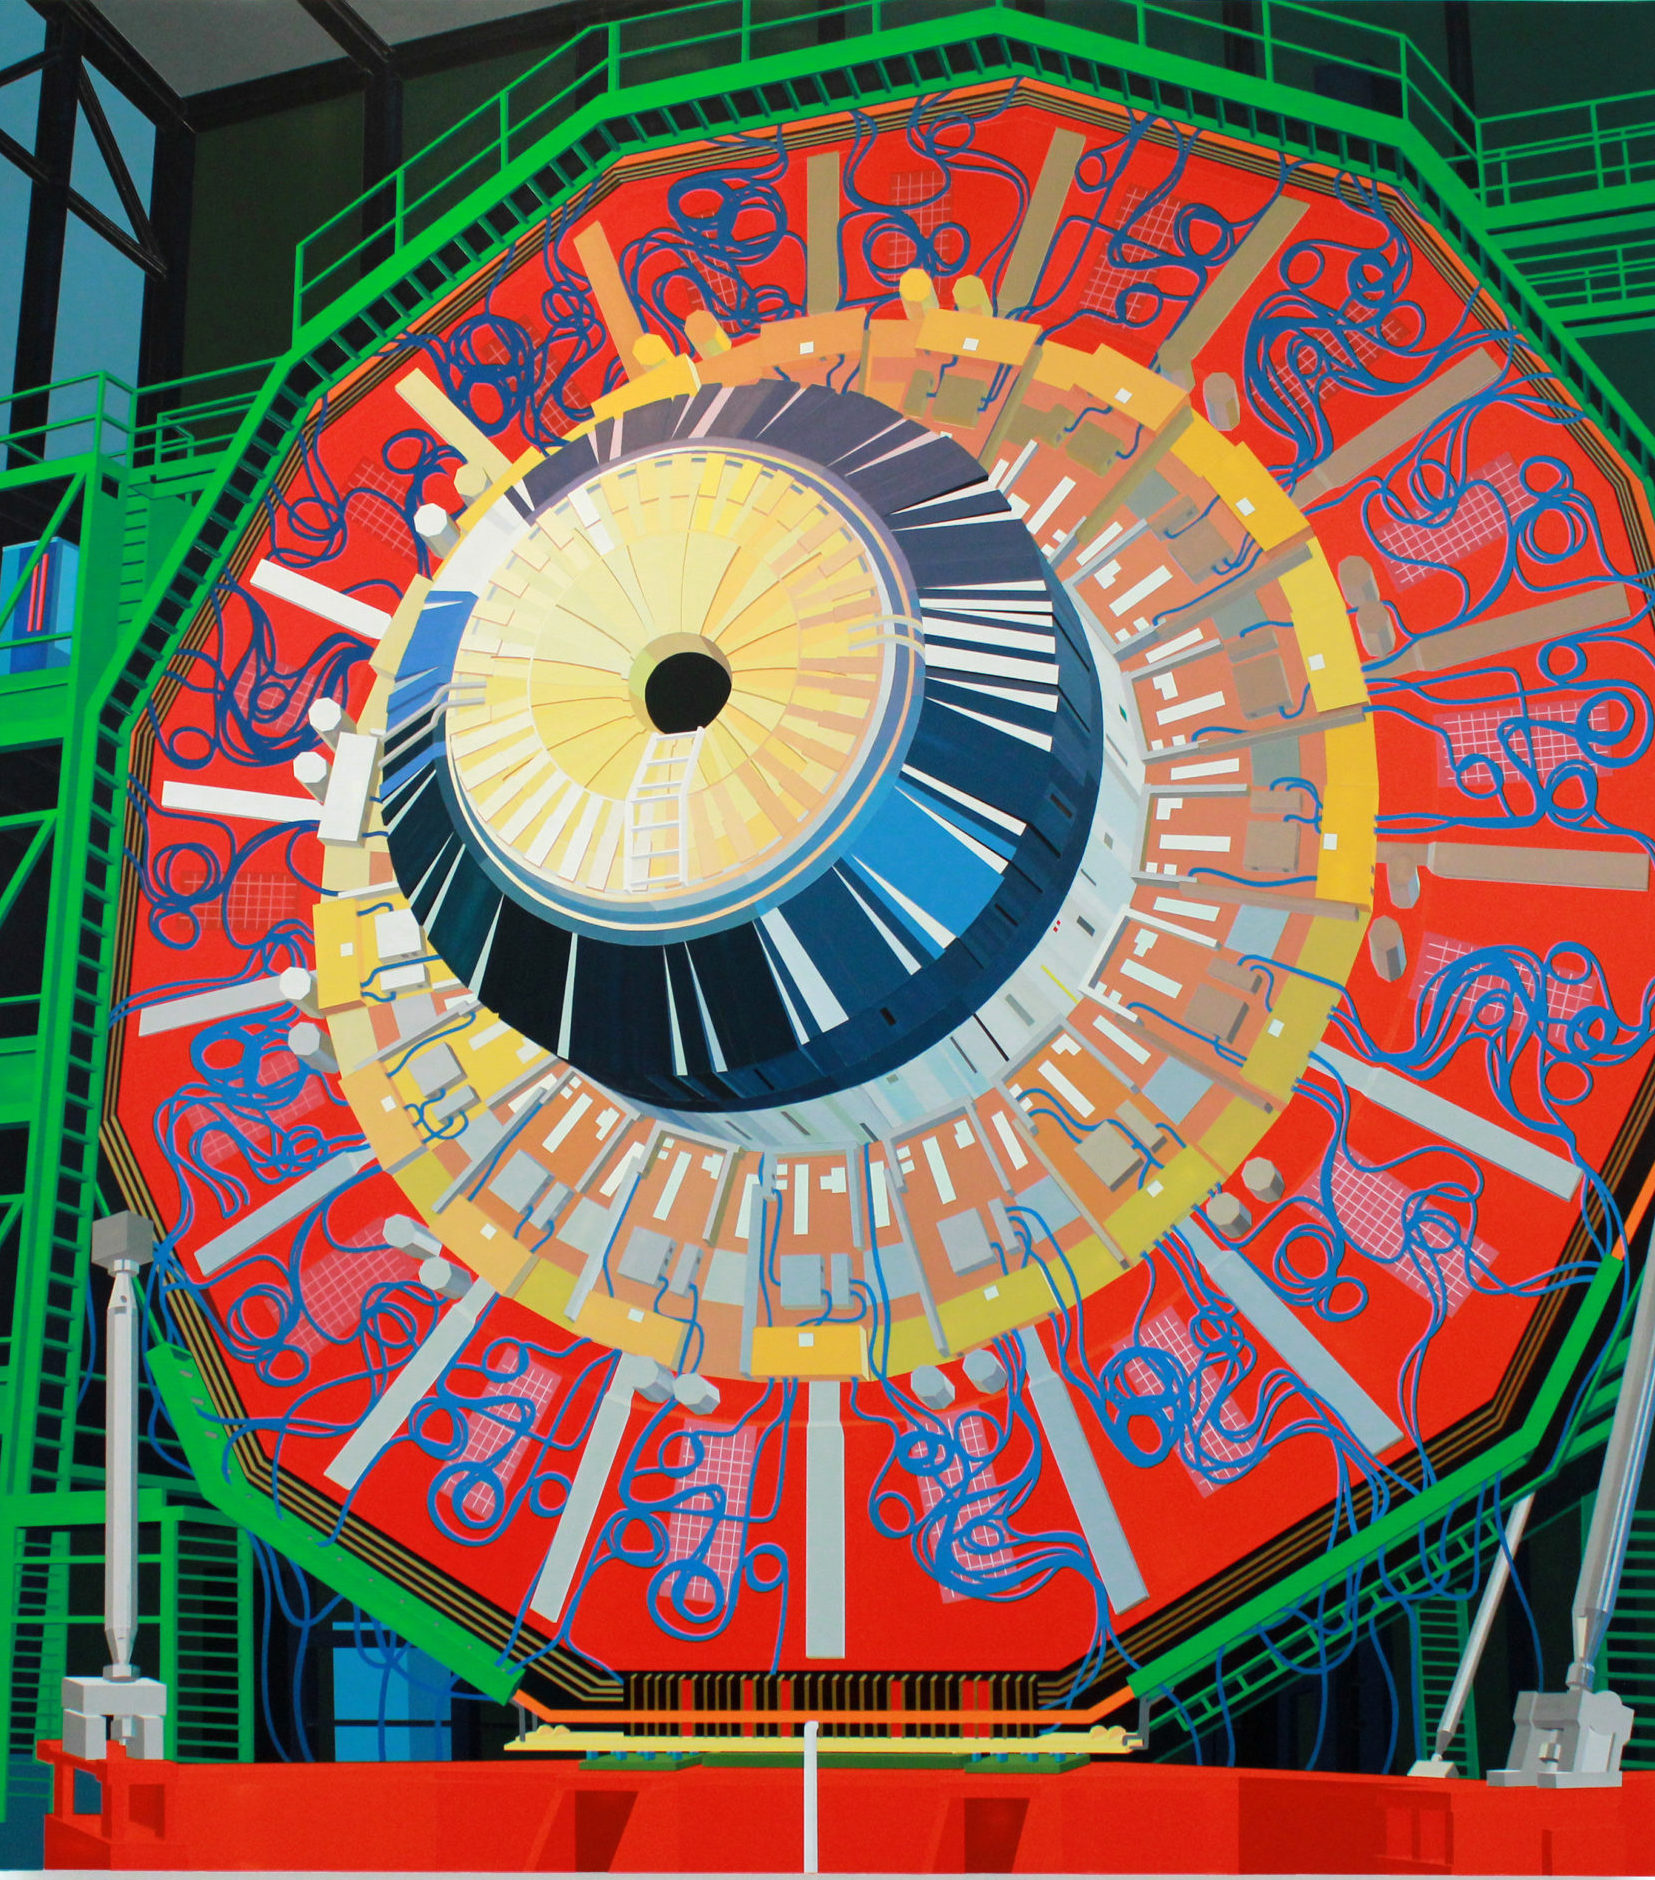 Depiction of a colorful (red, blue, yellow, green) collider, a large circular object.